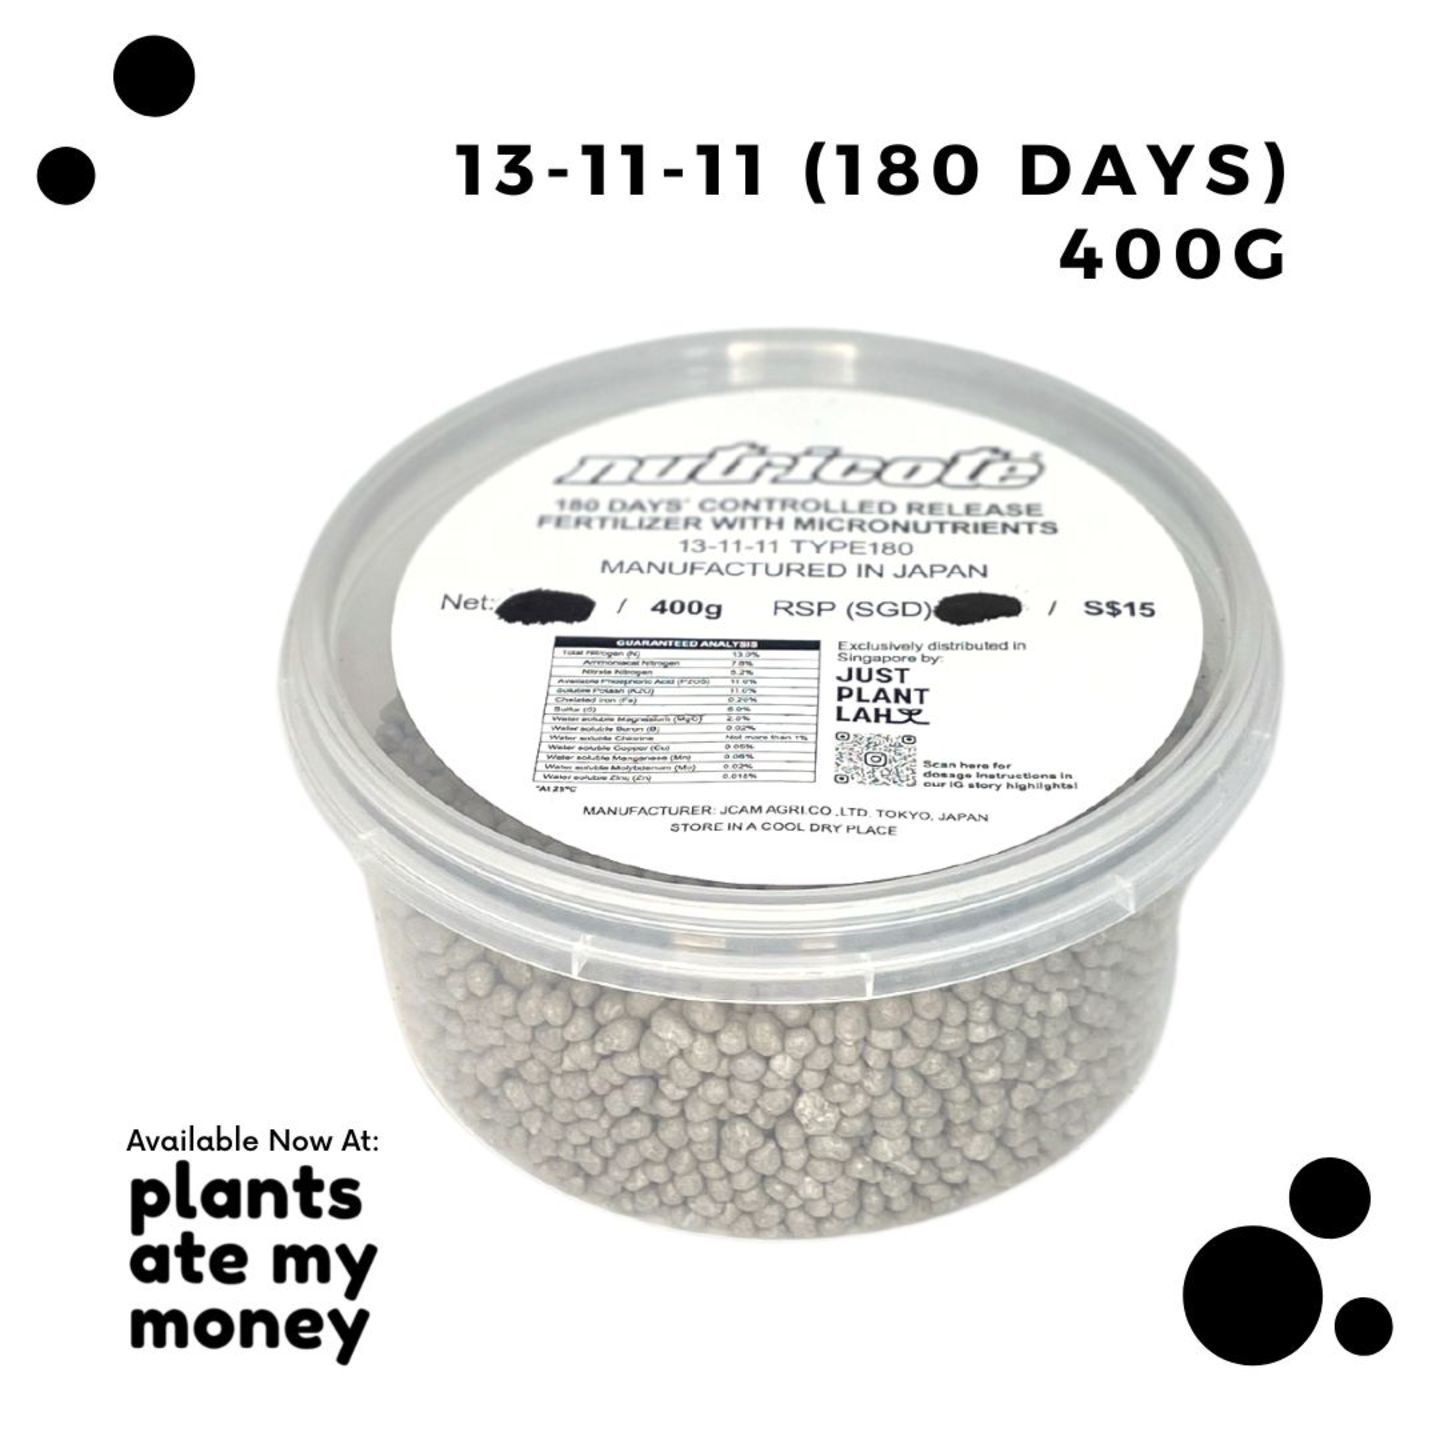 400g - 13-11-11 180 Days Nutricote Controlled Release Fertilizer with Micronutrients